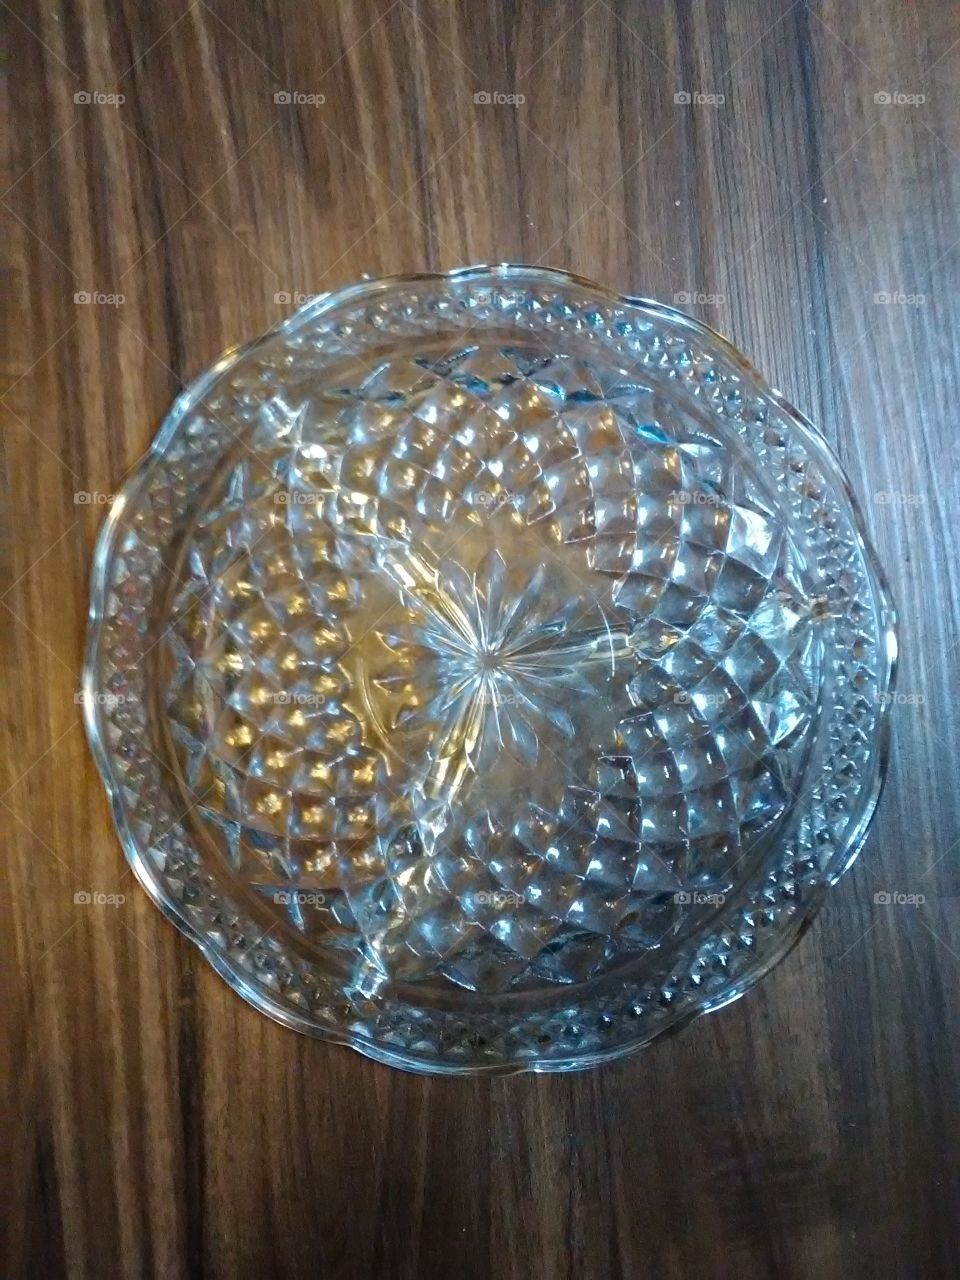 1970's vintage 3 piece glass candy dish with clear see through glass